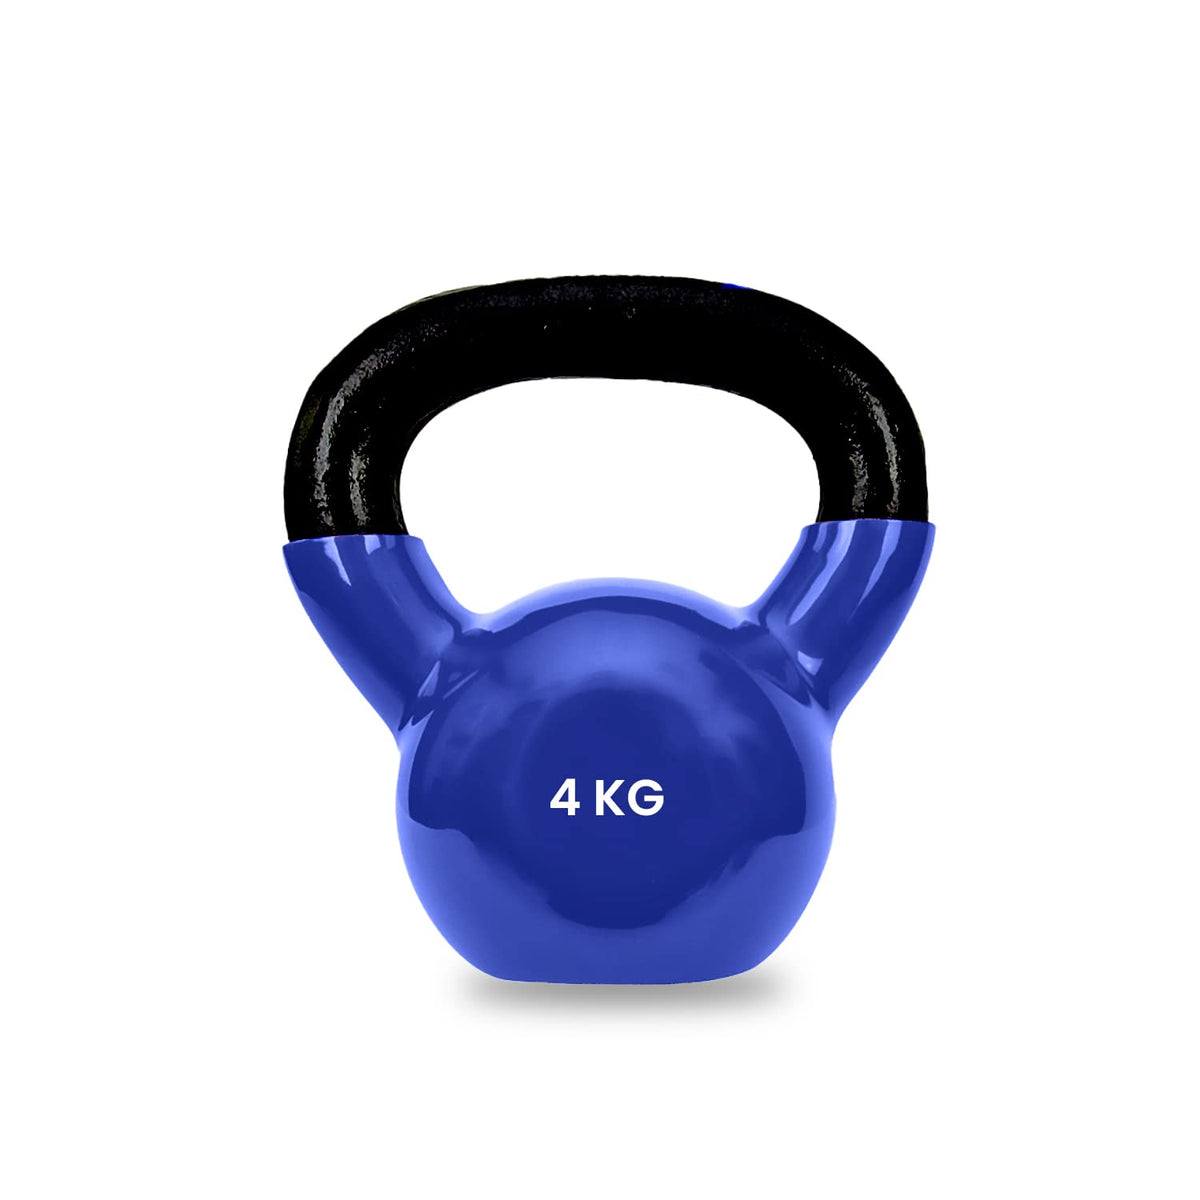 Strauss Premium Vinyl Kettlebell Weight for Men & Women | 8 Kg | Ideal for Home Workout, Yoga, Pilates, Gym Exercises | Non-Slip, Easy to Hold, Scratch Resistant (Blue)